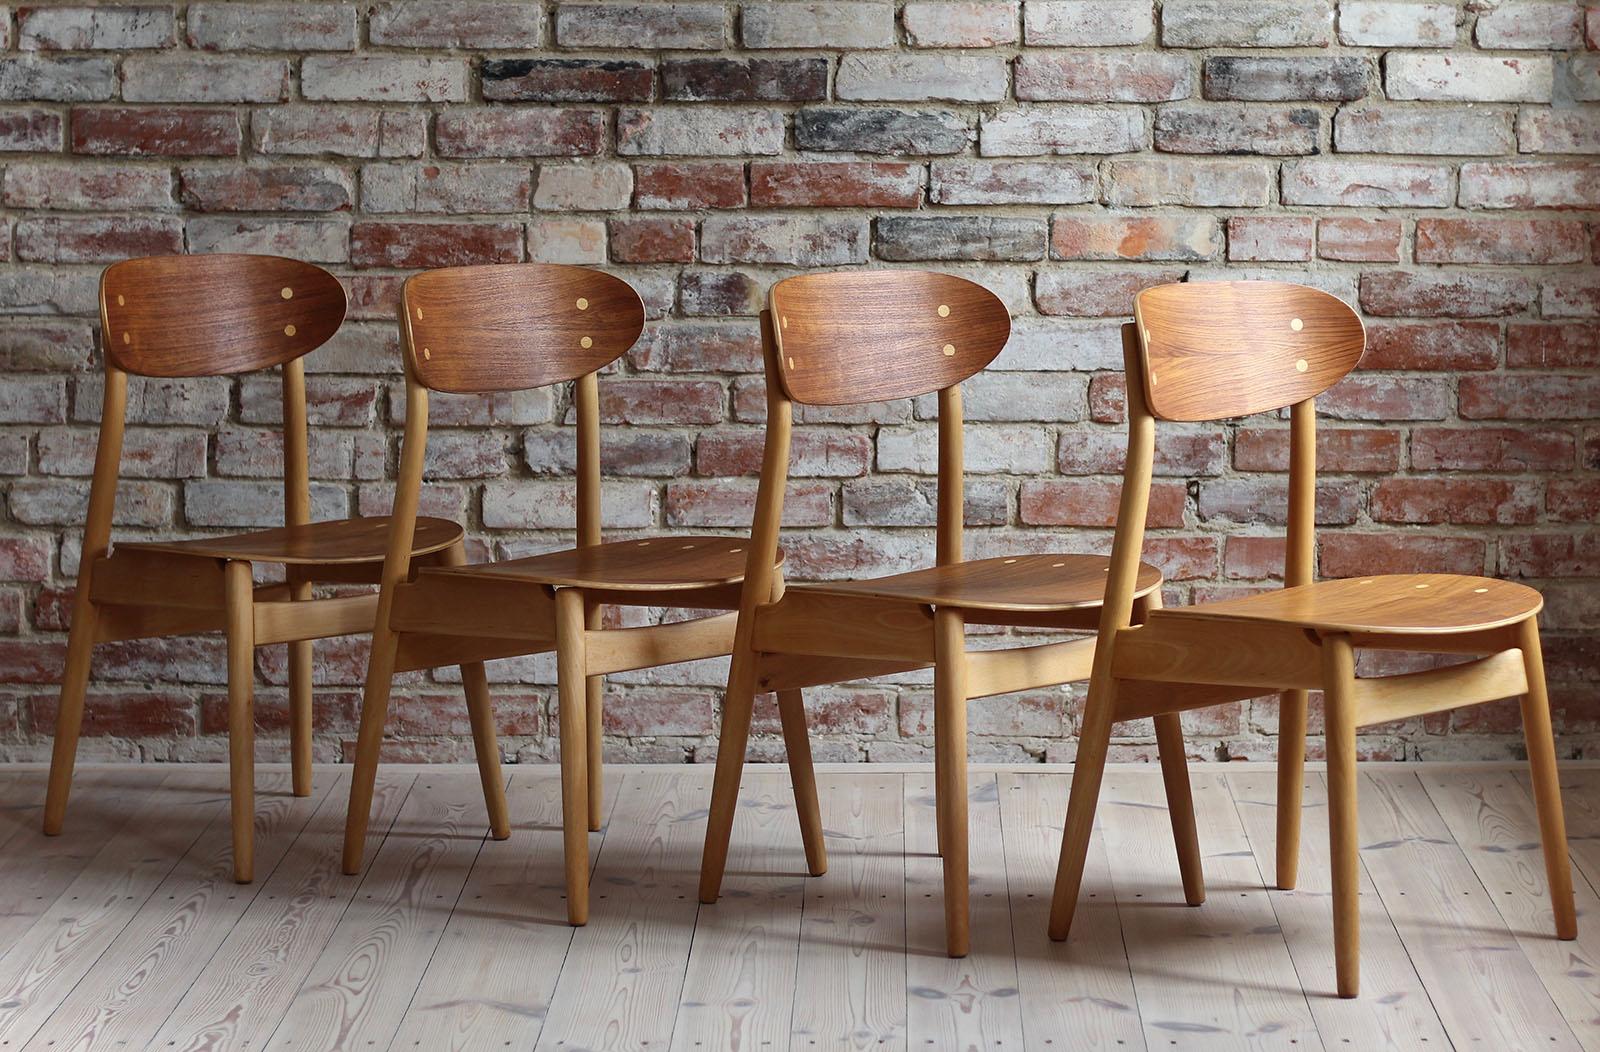 These chairs were designed by Sven Erik Fryklund and manufactured by Swedish Hagafors Stolfabrik manufacture in 1960s. Frame is made of beech wood, seat and backrest are made of bent teak. The chairs are very well designed, in perfect proportions